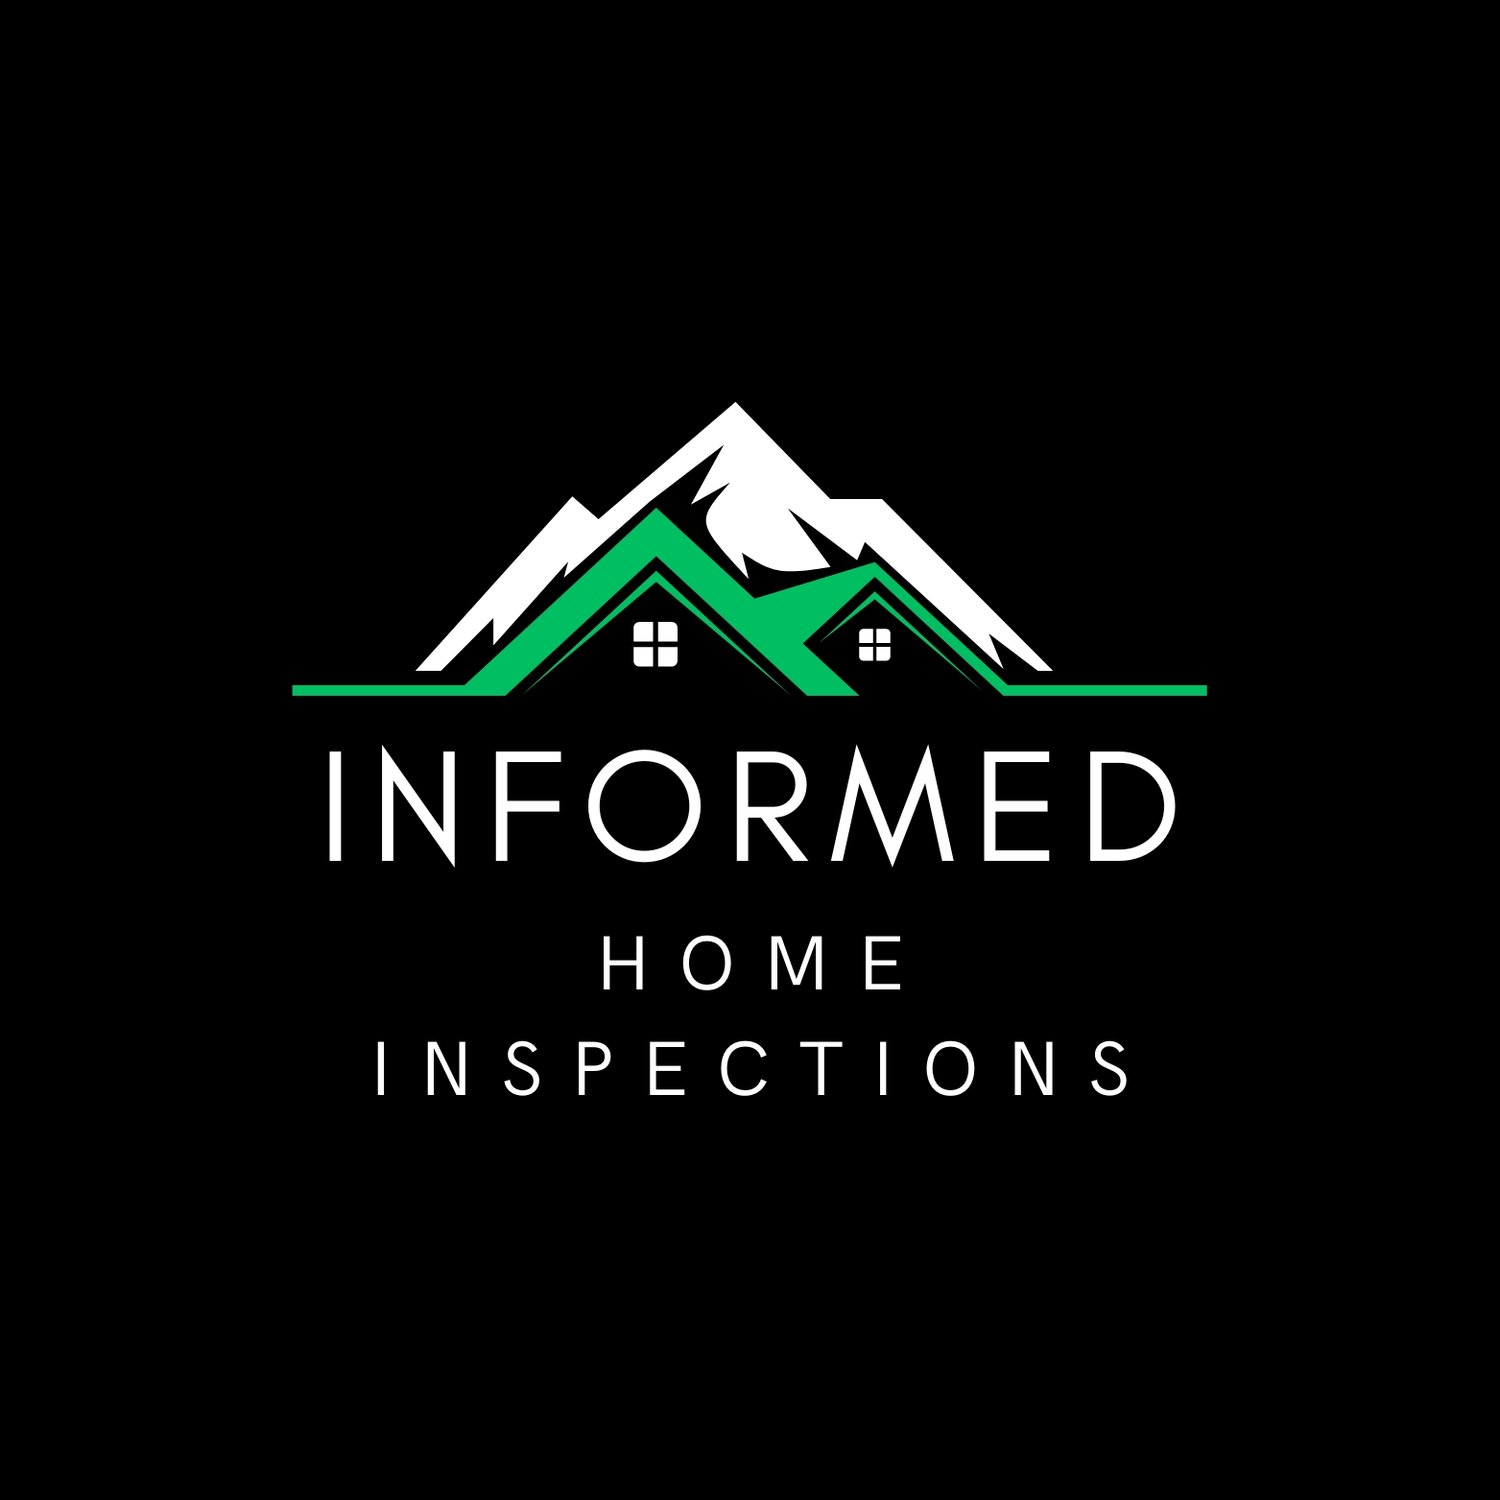 Informed Home Inspections